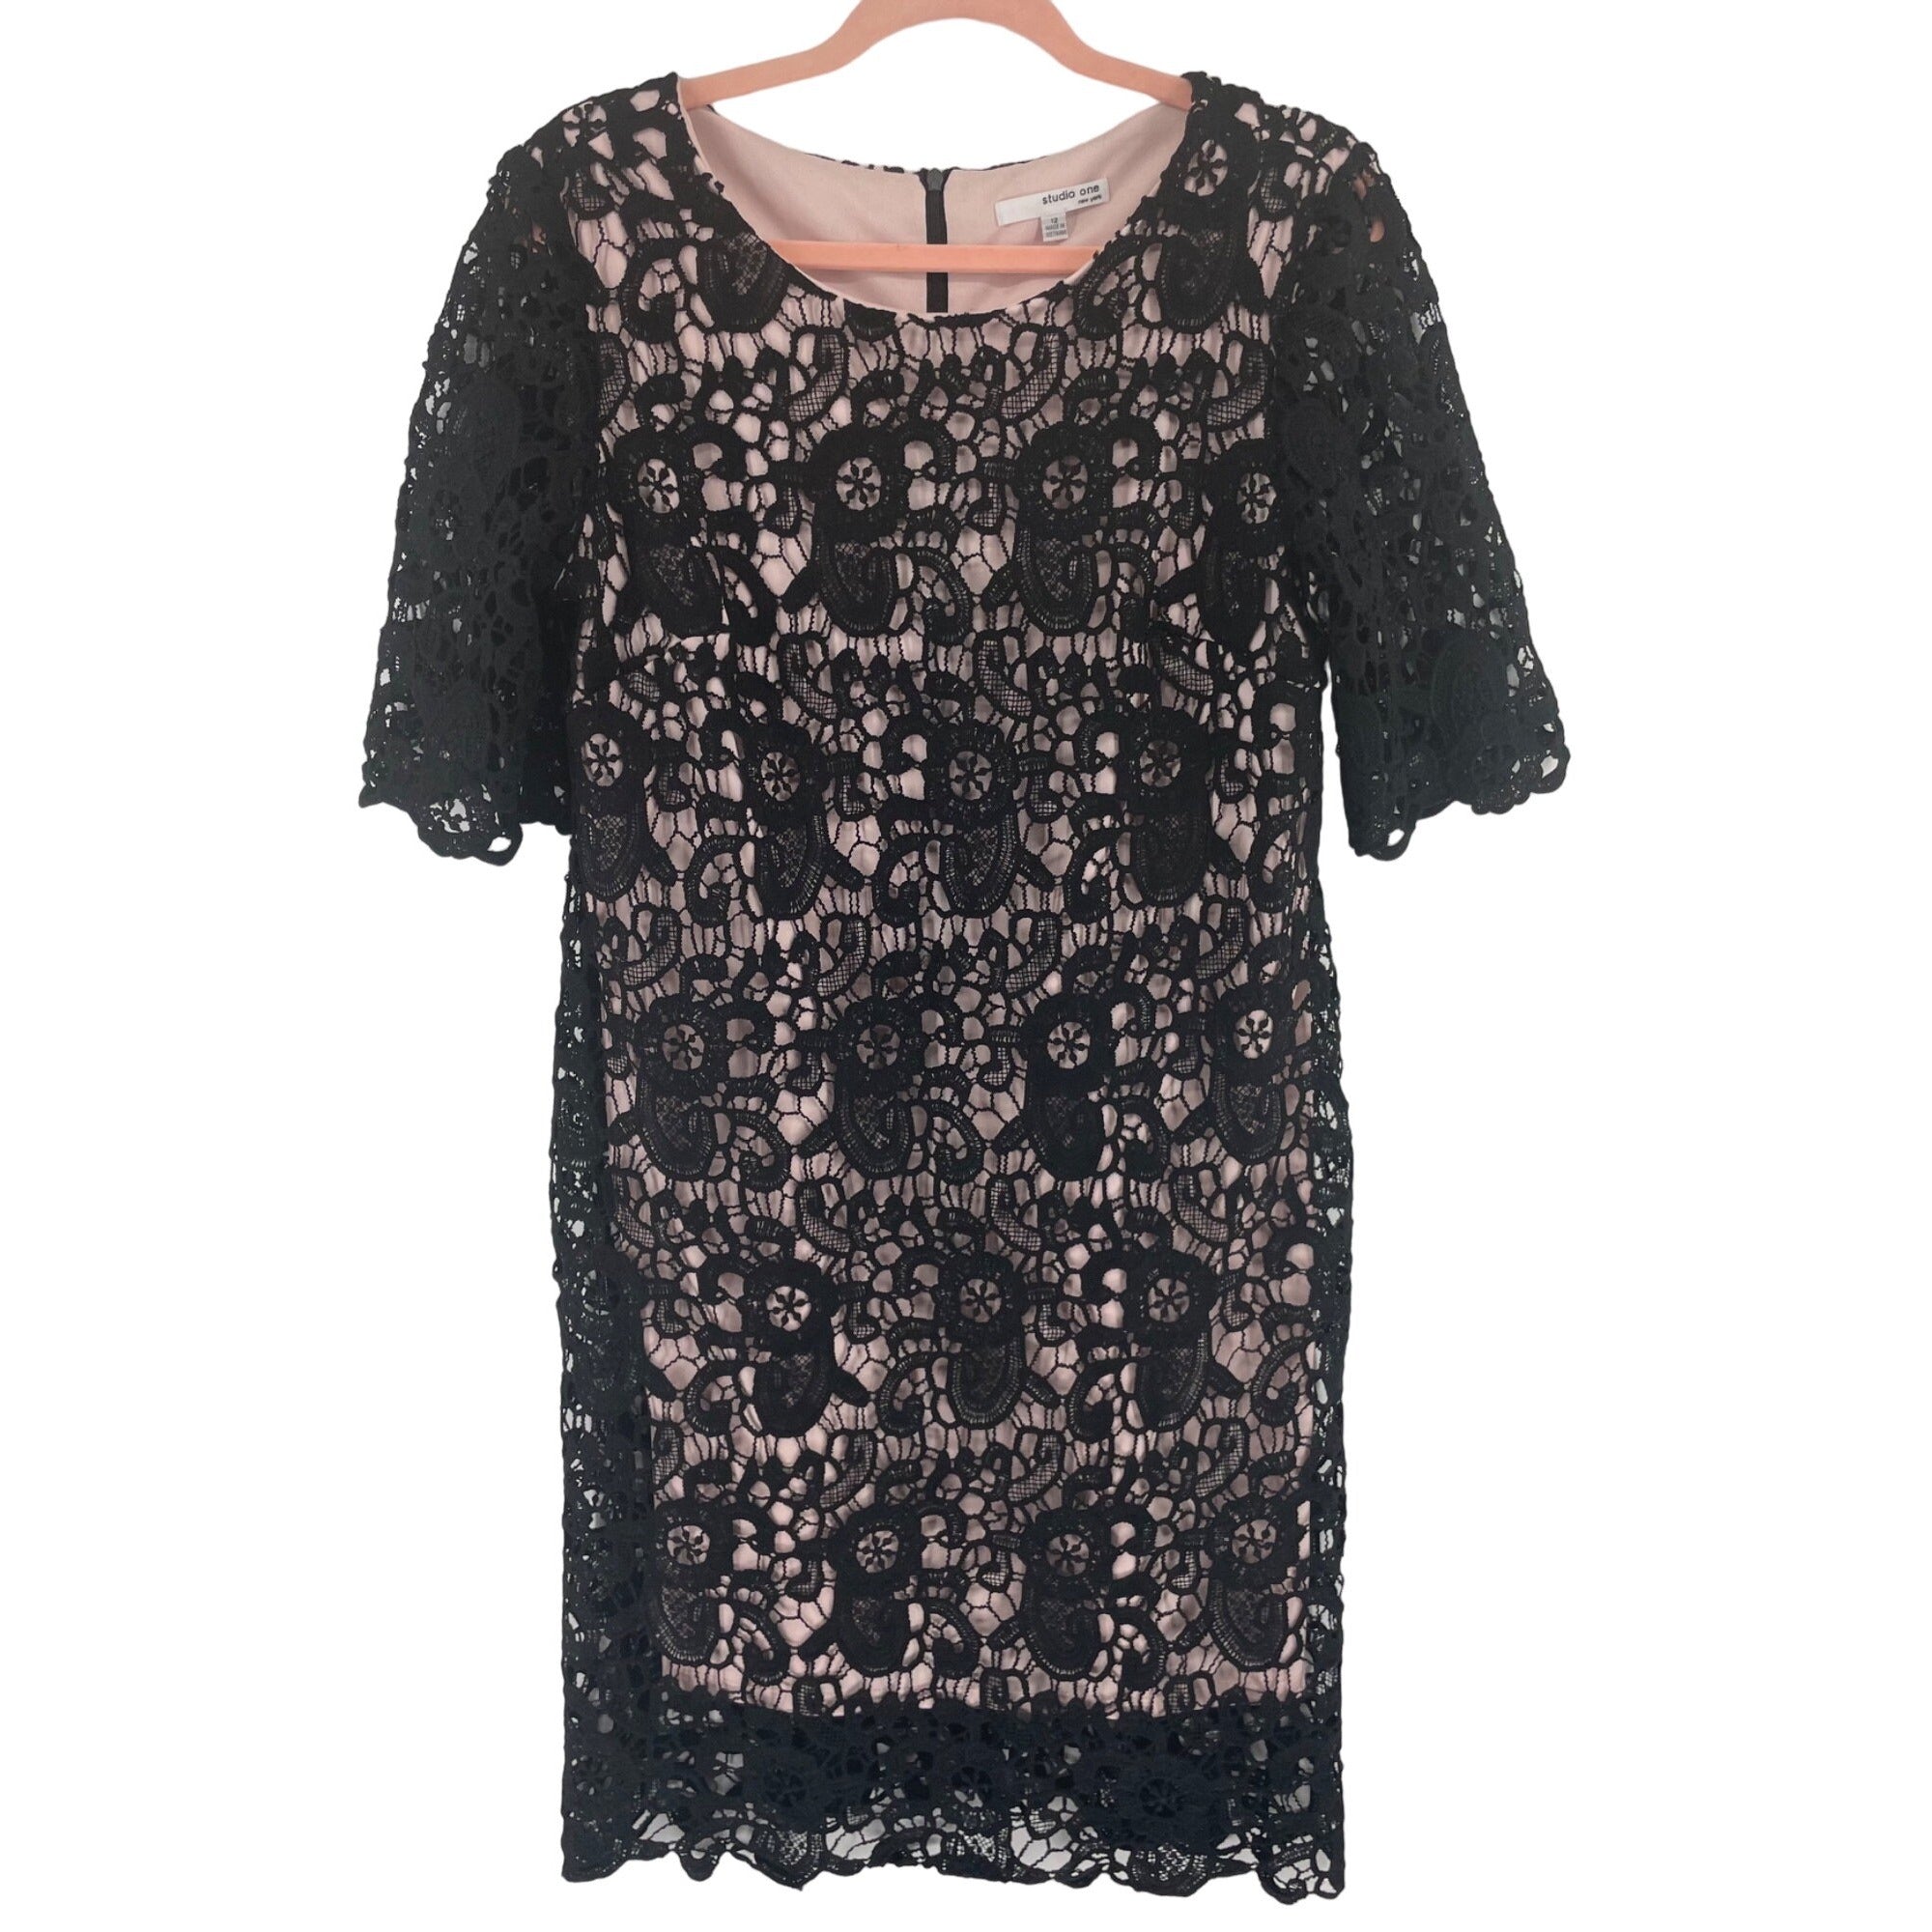 Studio One New York Women's Size 12 Black & Pink Floral Lace Dress